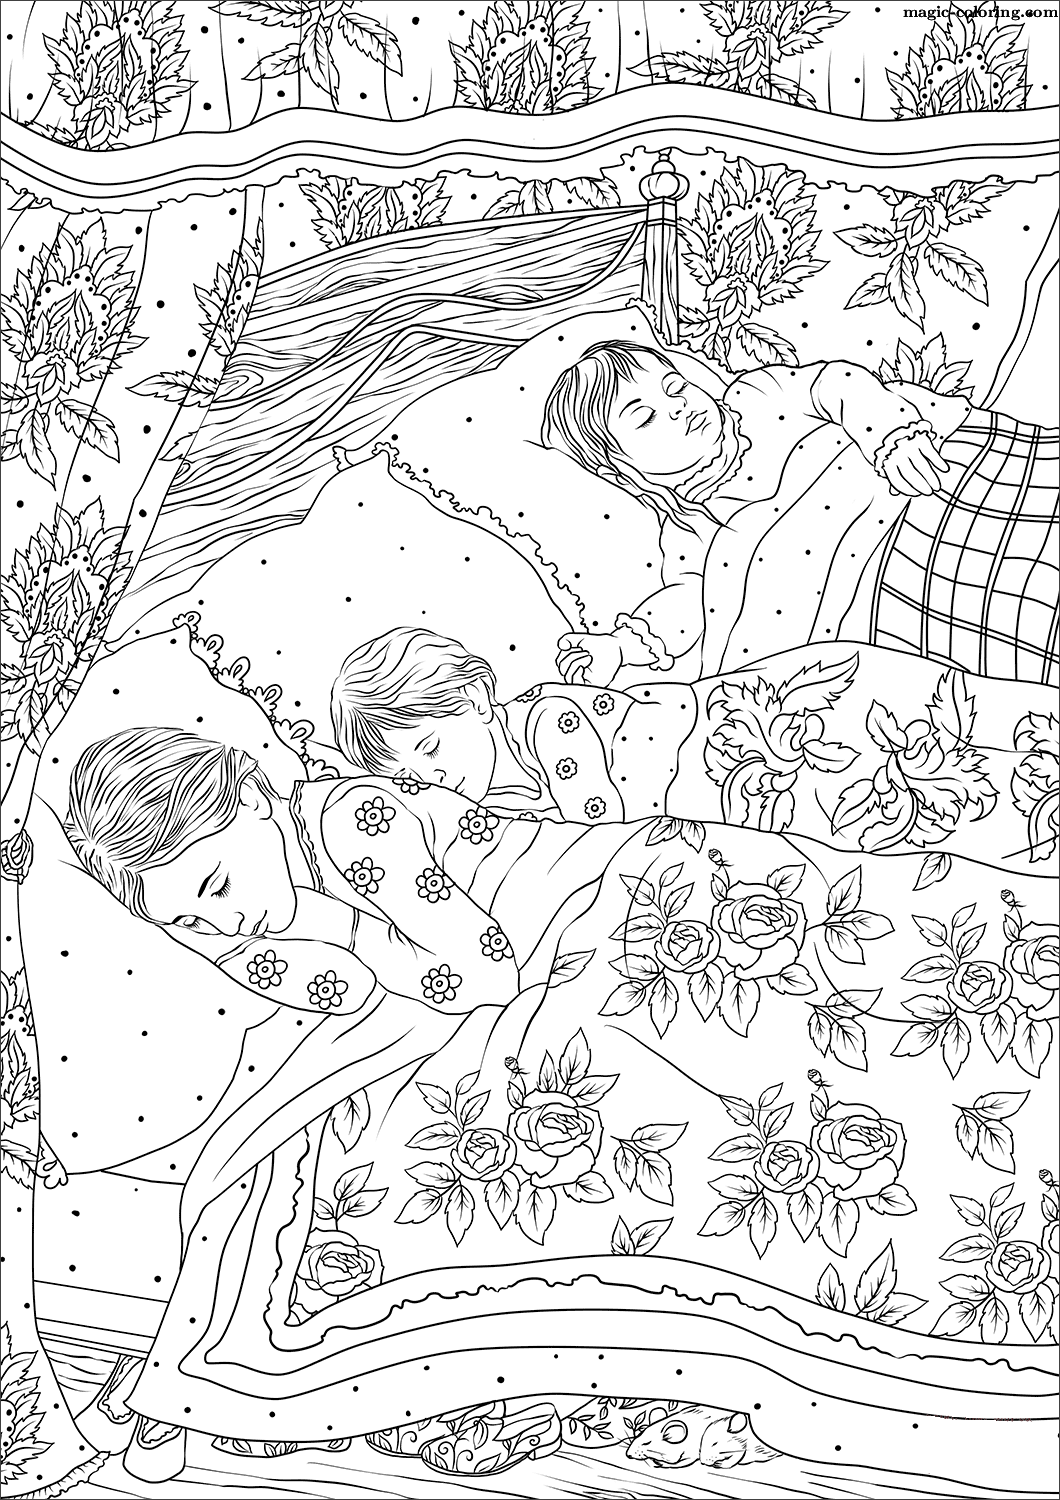 The Children sleeping in Their Beds Coloring Page